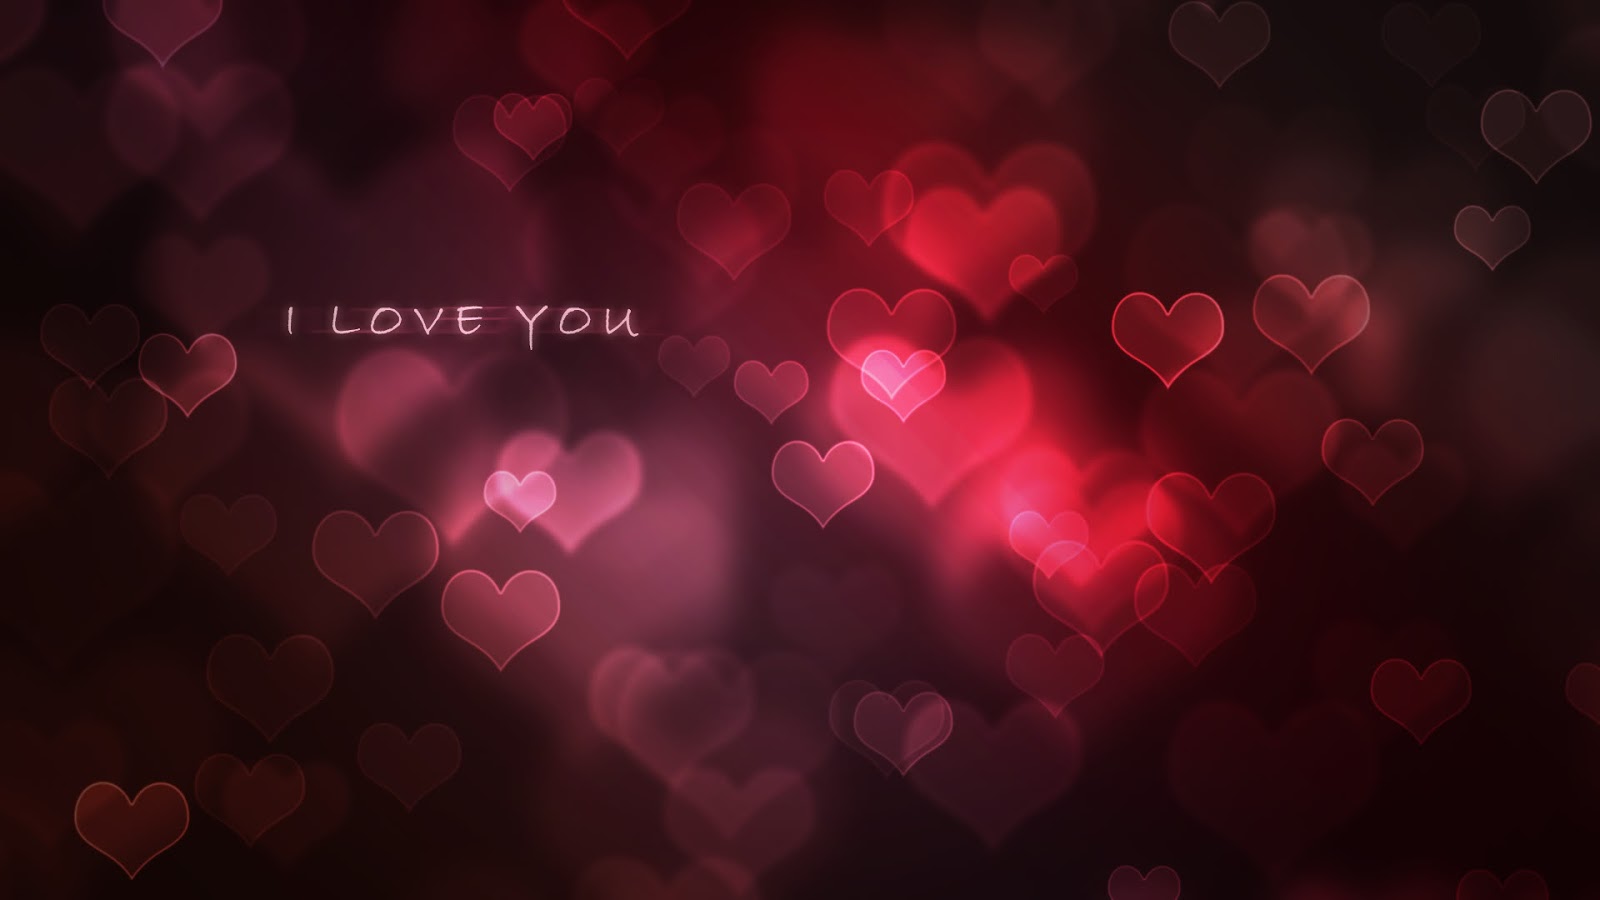 I Love You Images and HD Wallpapers 2016 | Happy Valentine Day 2016